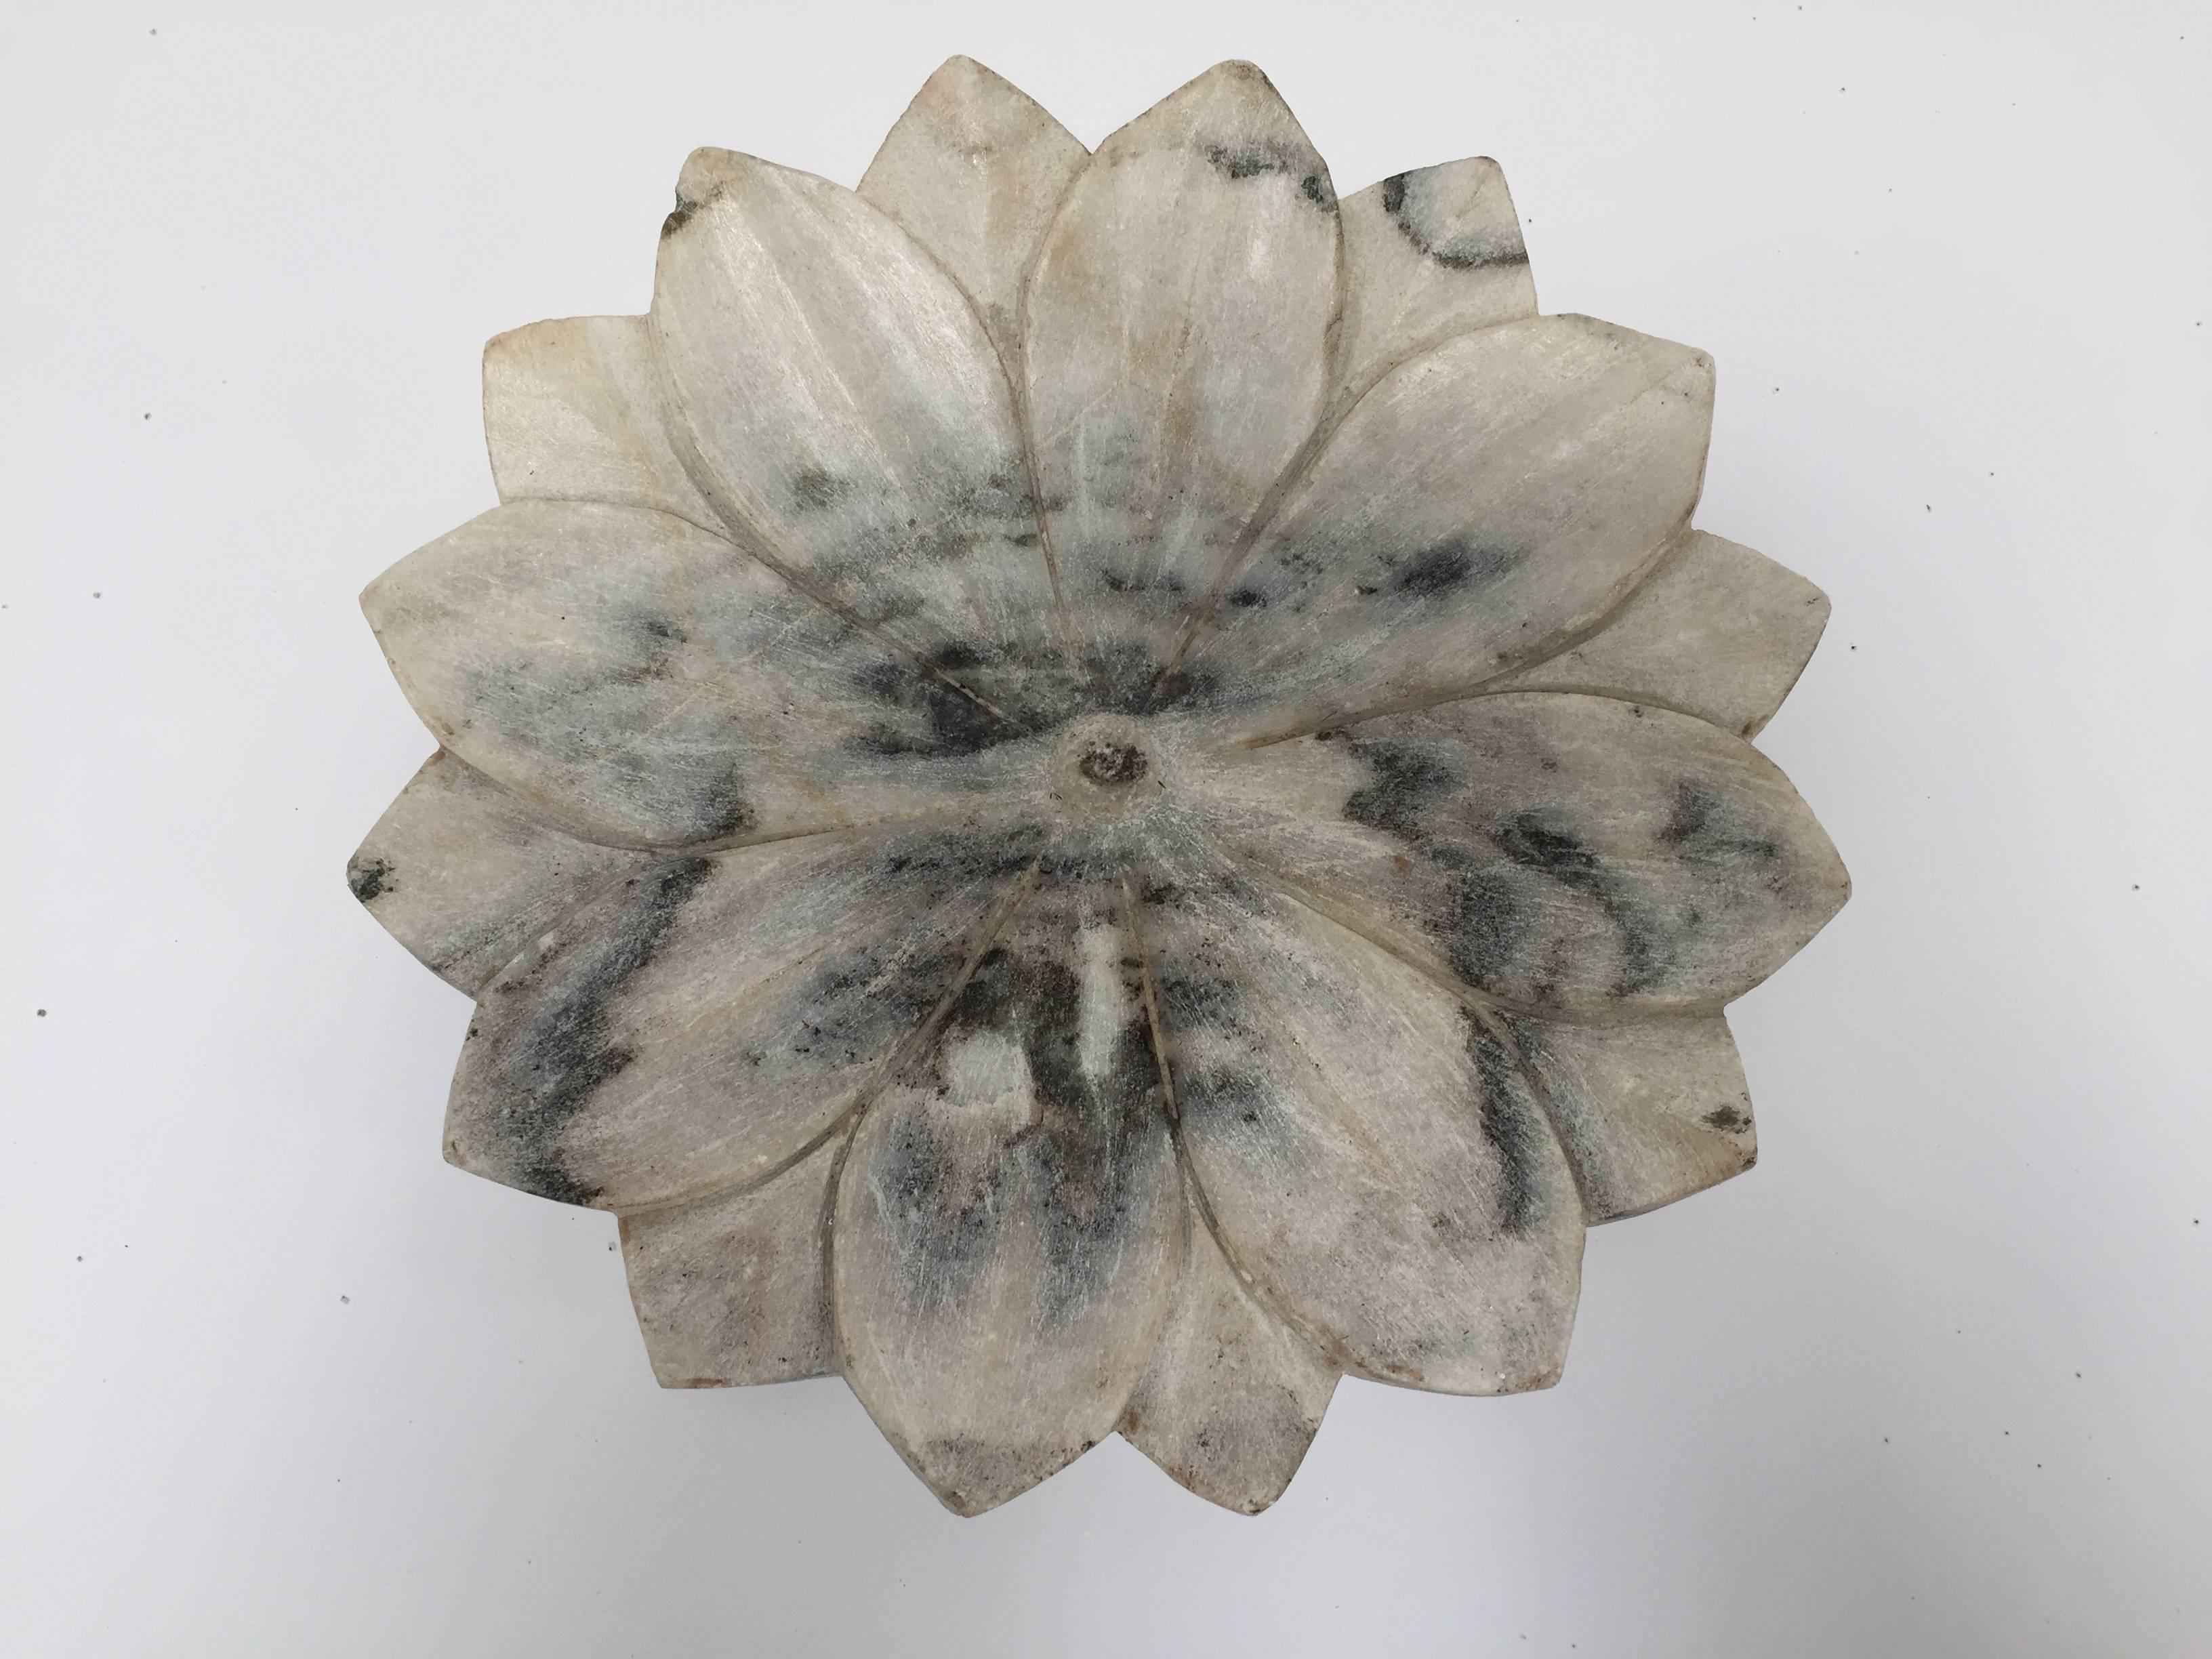 Large carved white marble flower plate.
Handcrafted in India, you can use this lotus form bowl indoor or outdoor.
White marble with black.
Size is 13